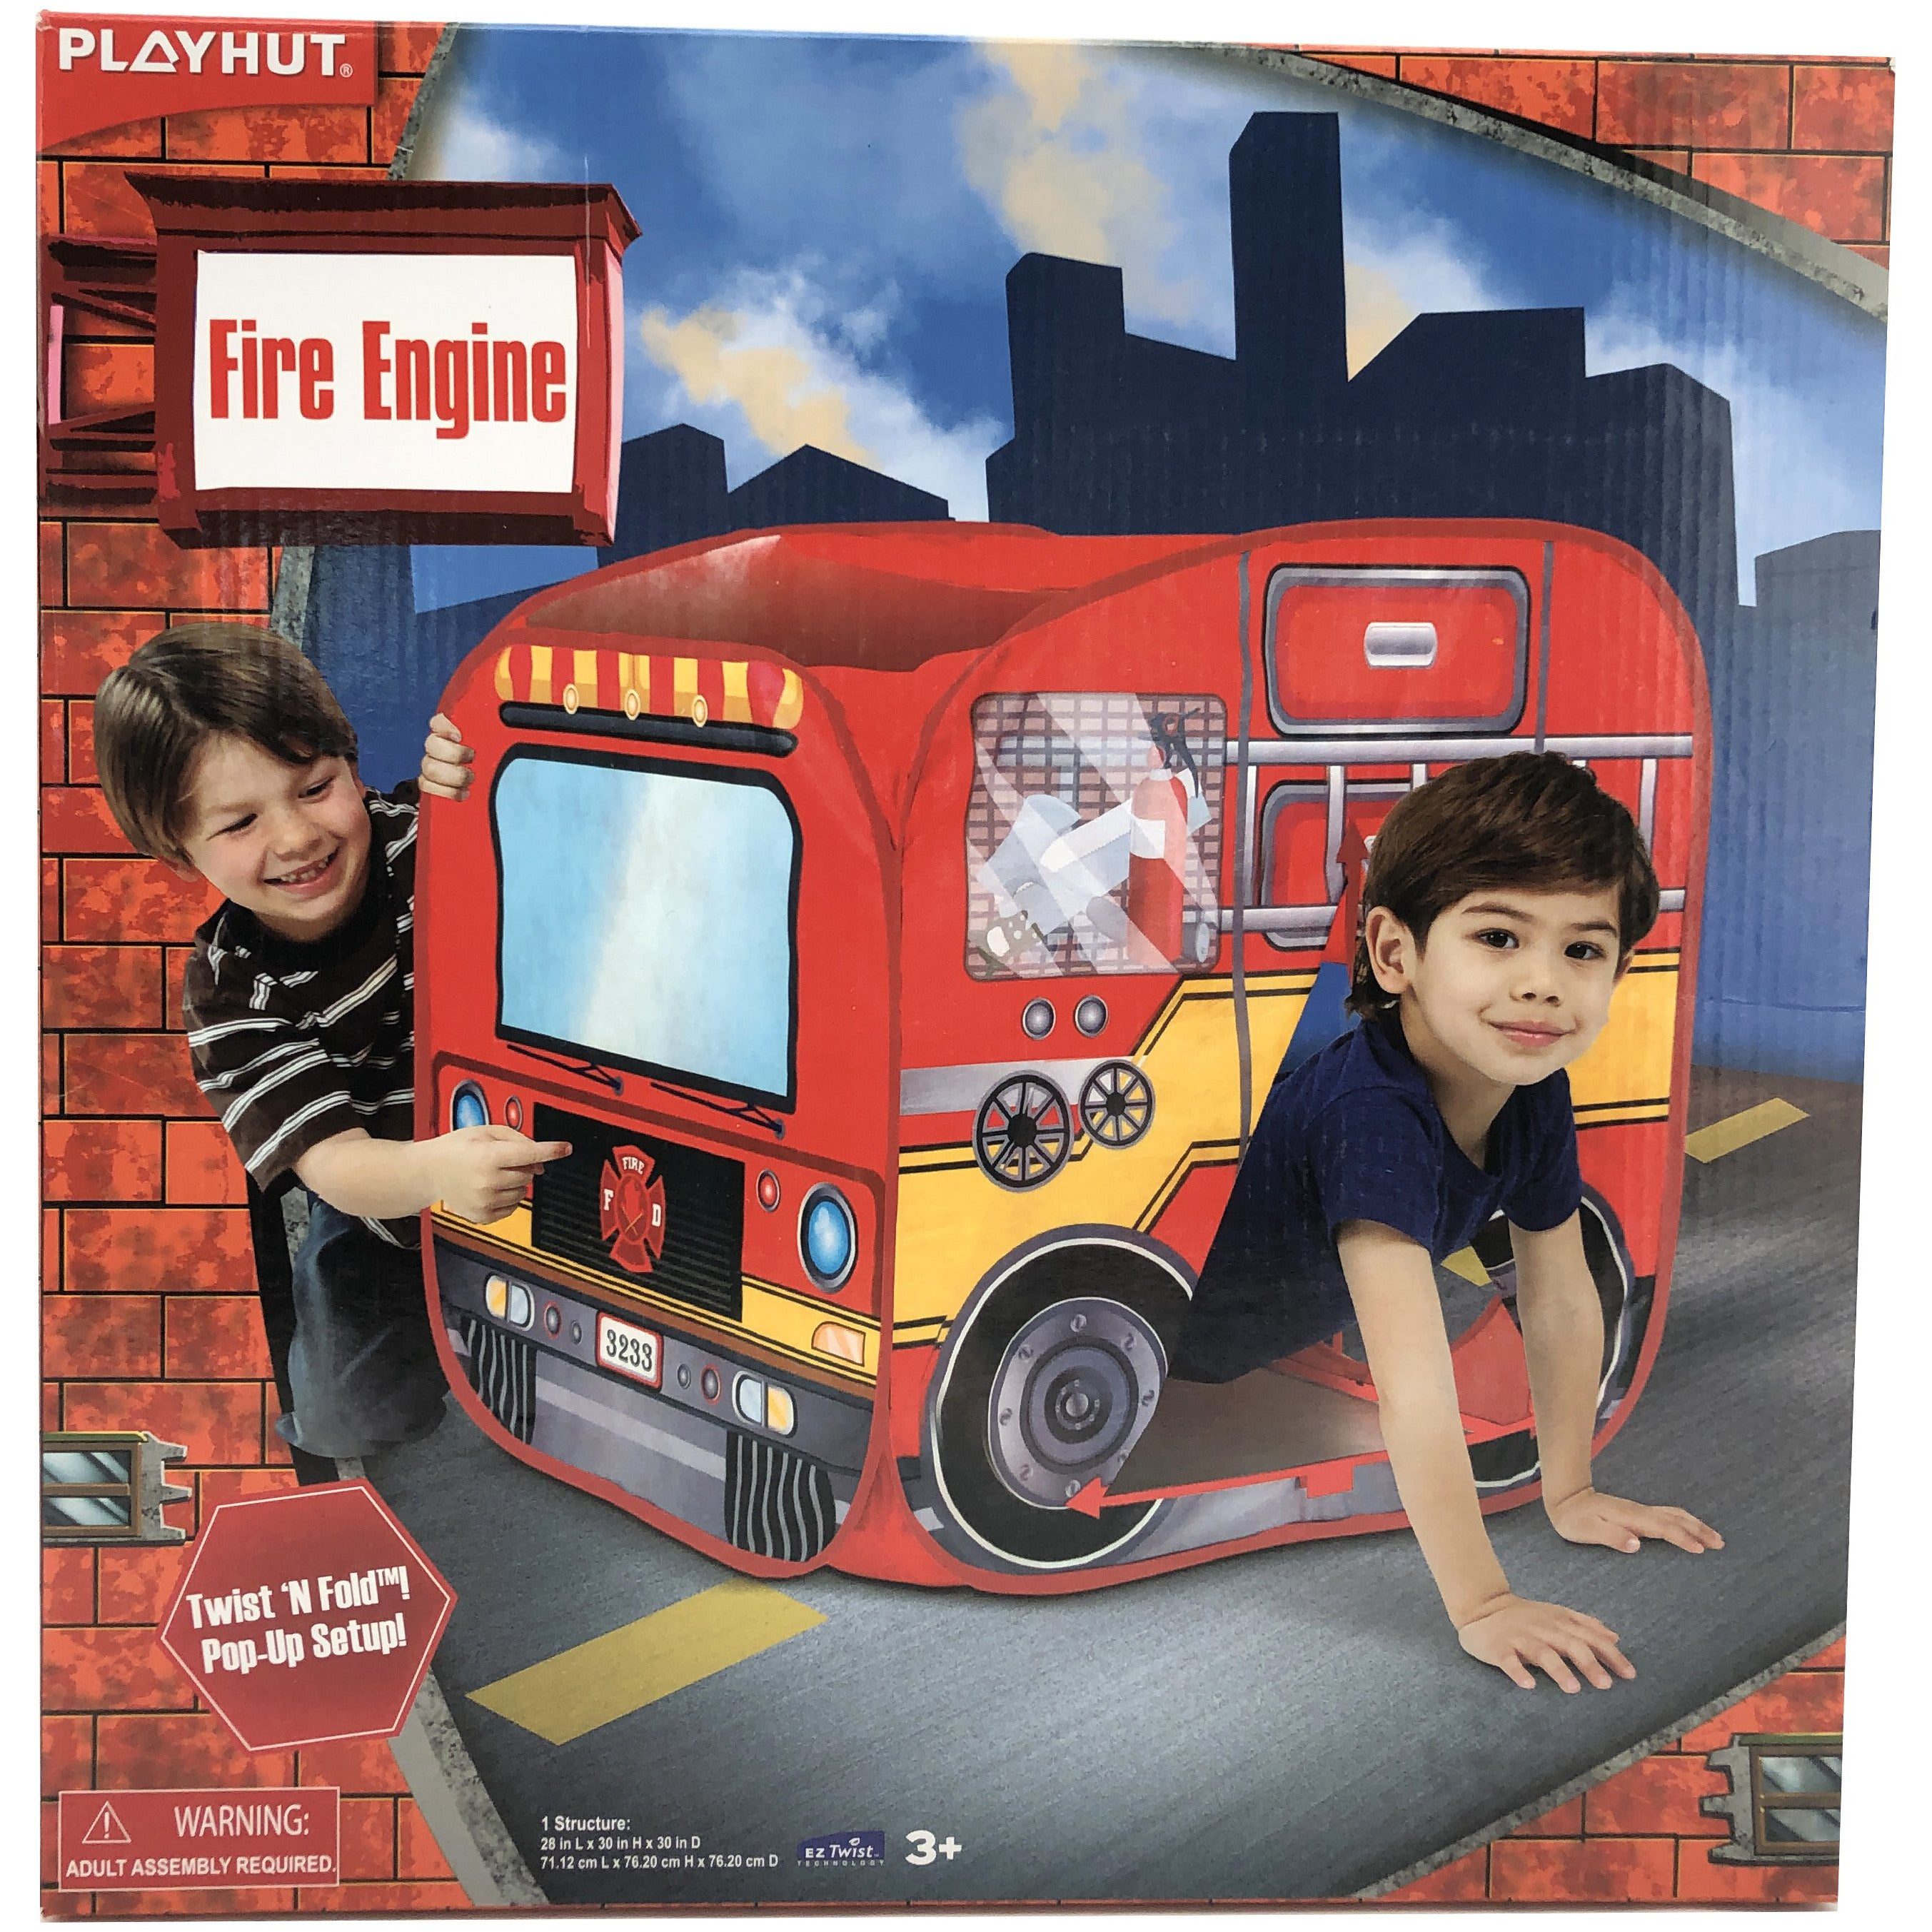 Playhut Fire Engine Play structure